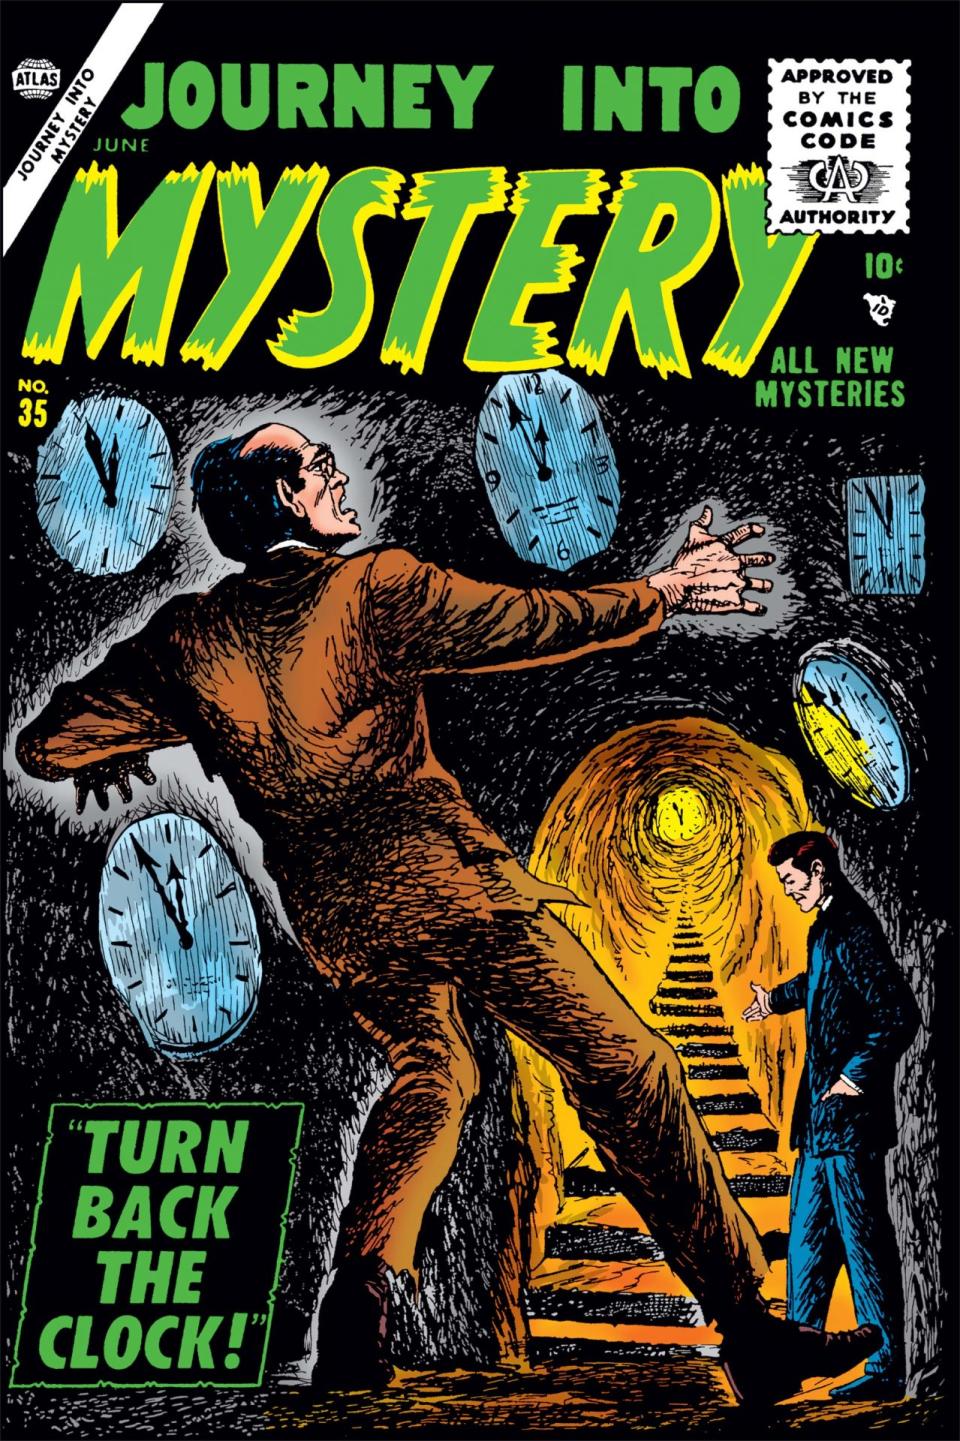 The cover for Journey into Mystery 35 shows a man falling through darkness surrounded by clocks